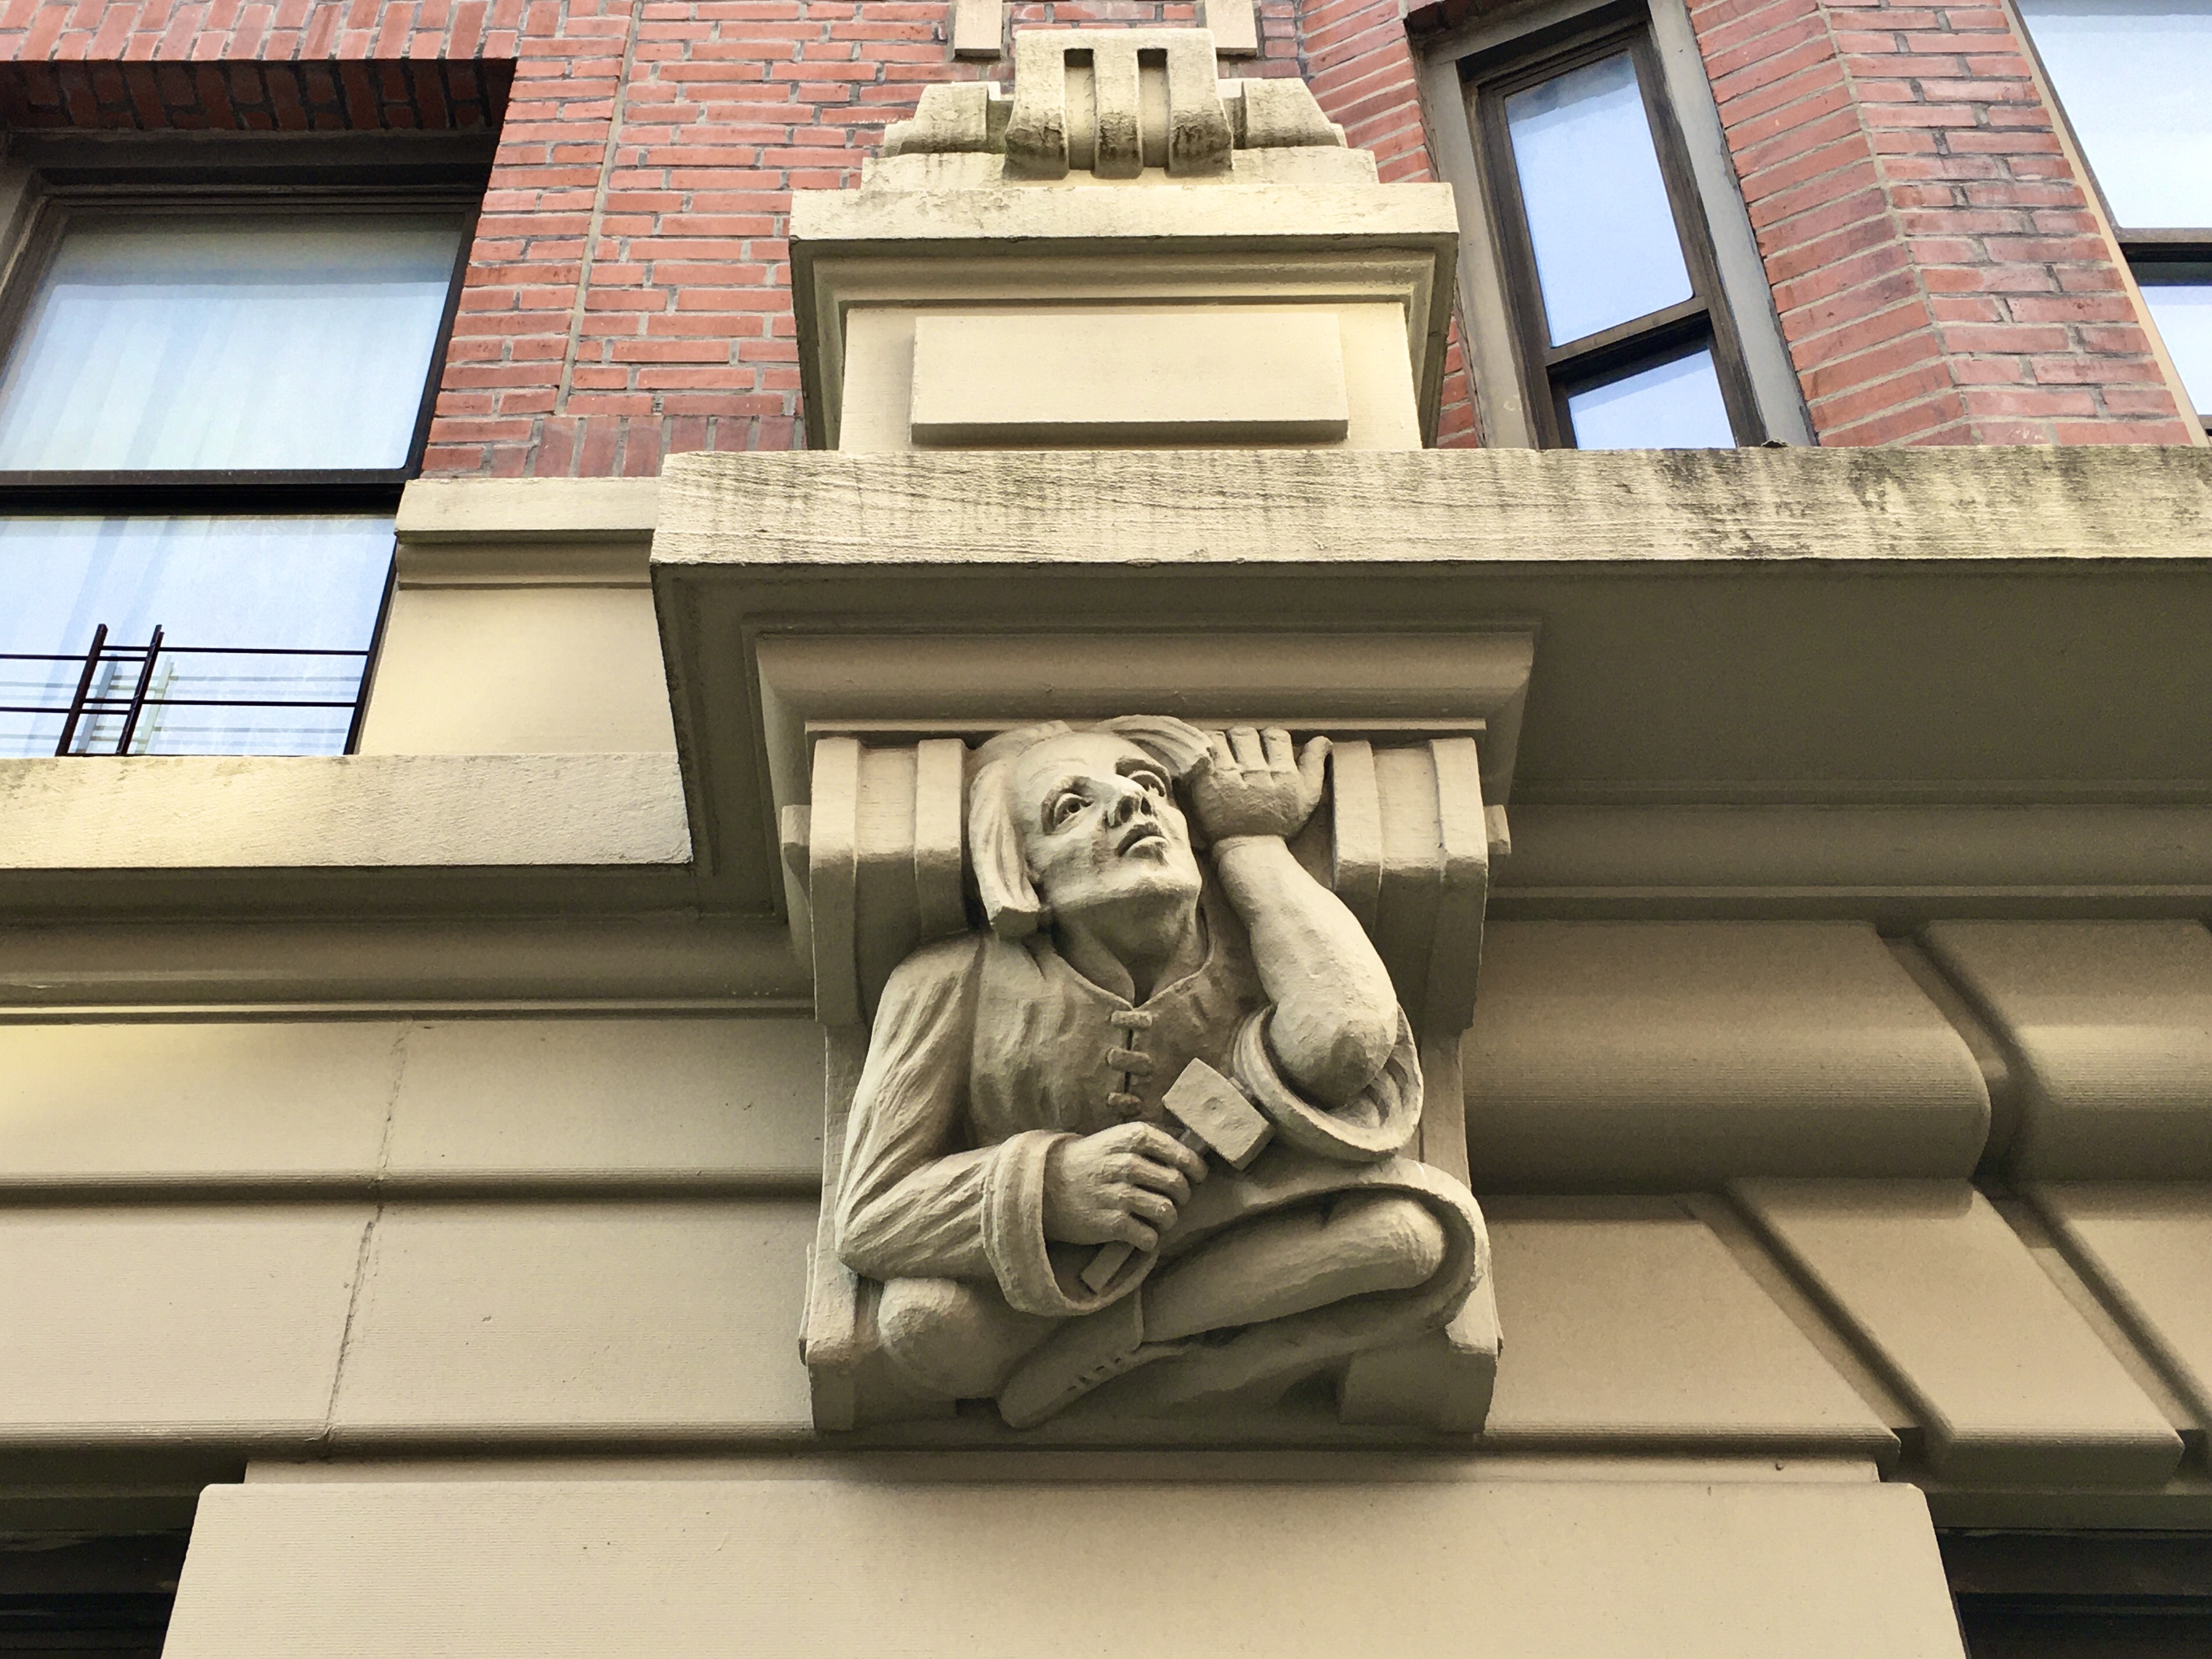 This dour fellow can be found on the facade of the Royal Castle Apartments. Photo: Lore Croghan/Brooklyn Eagle